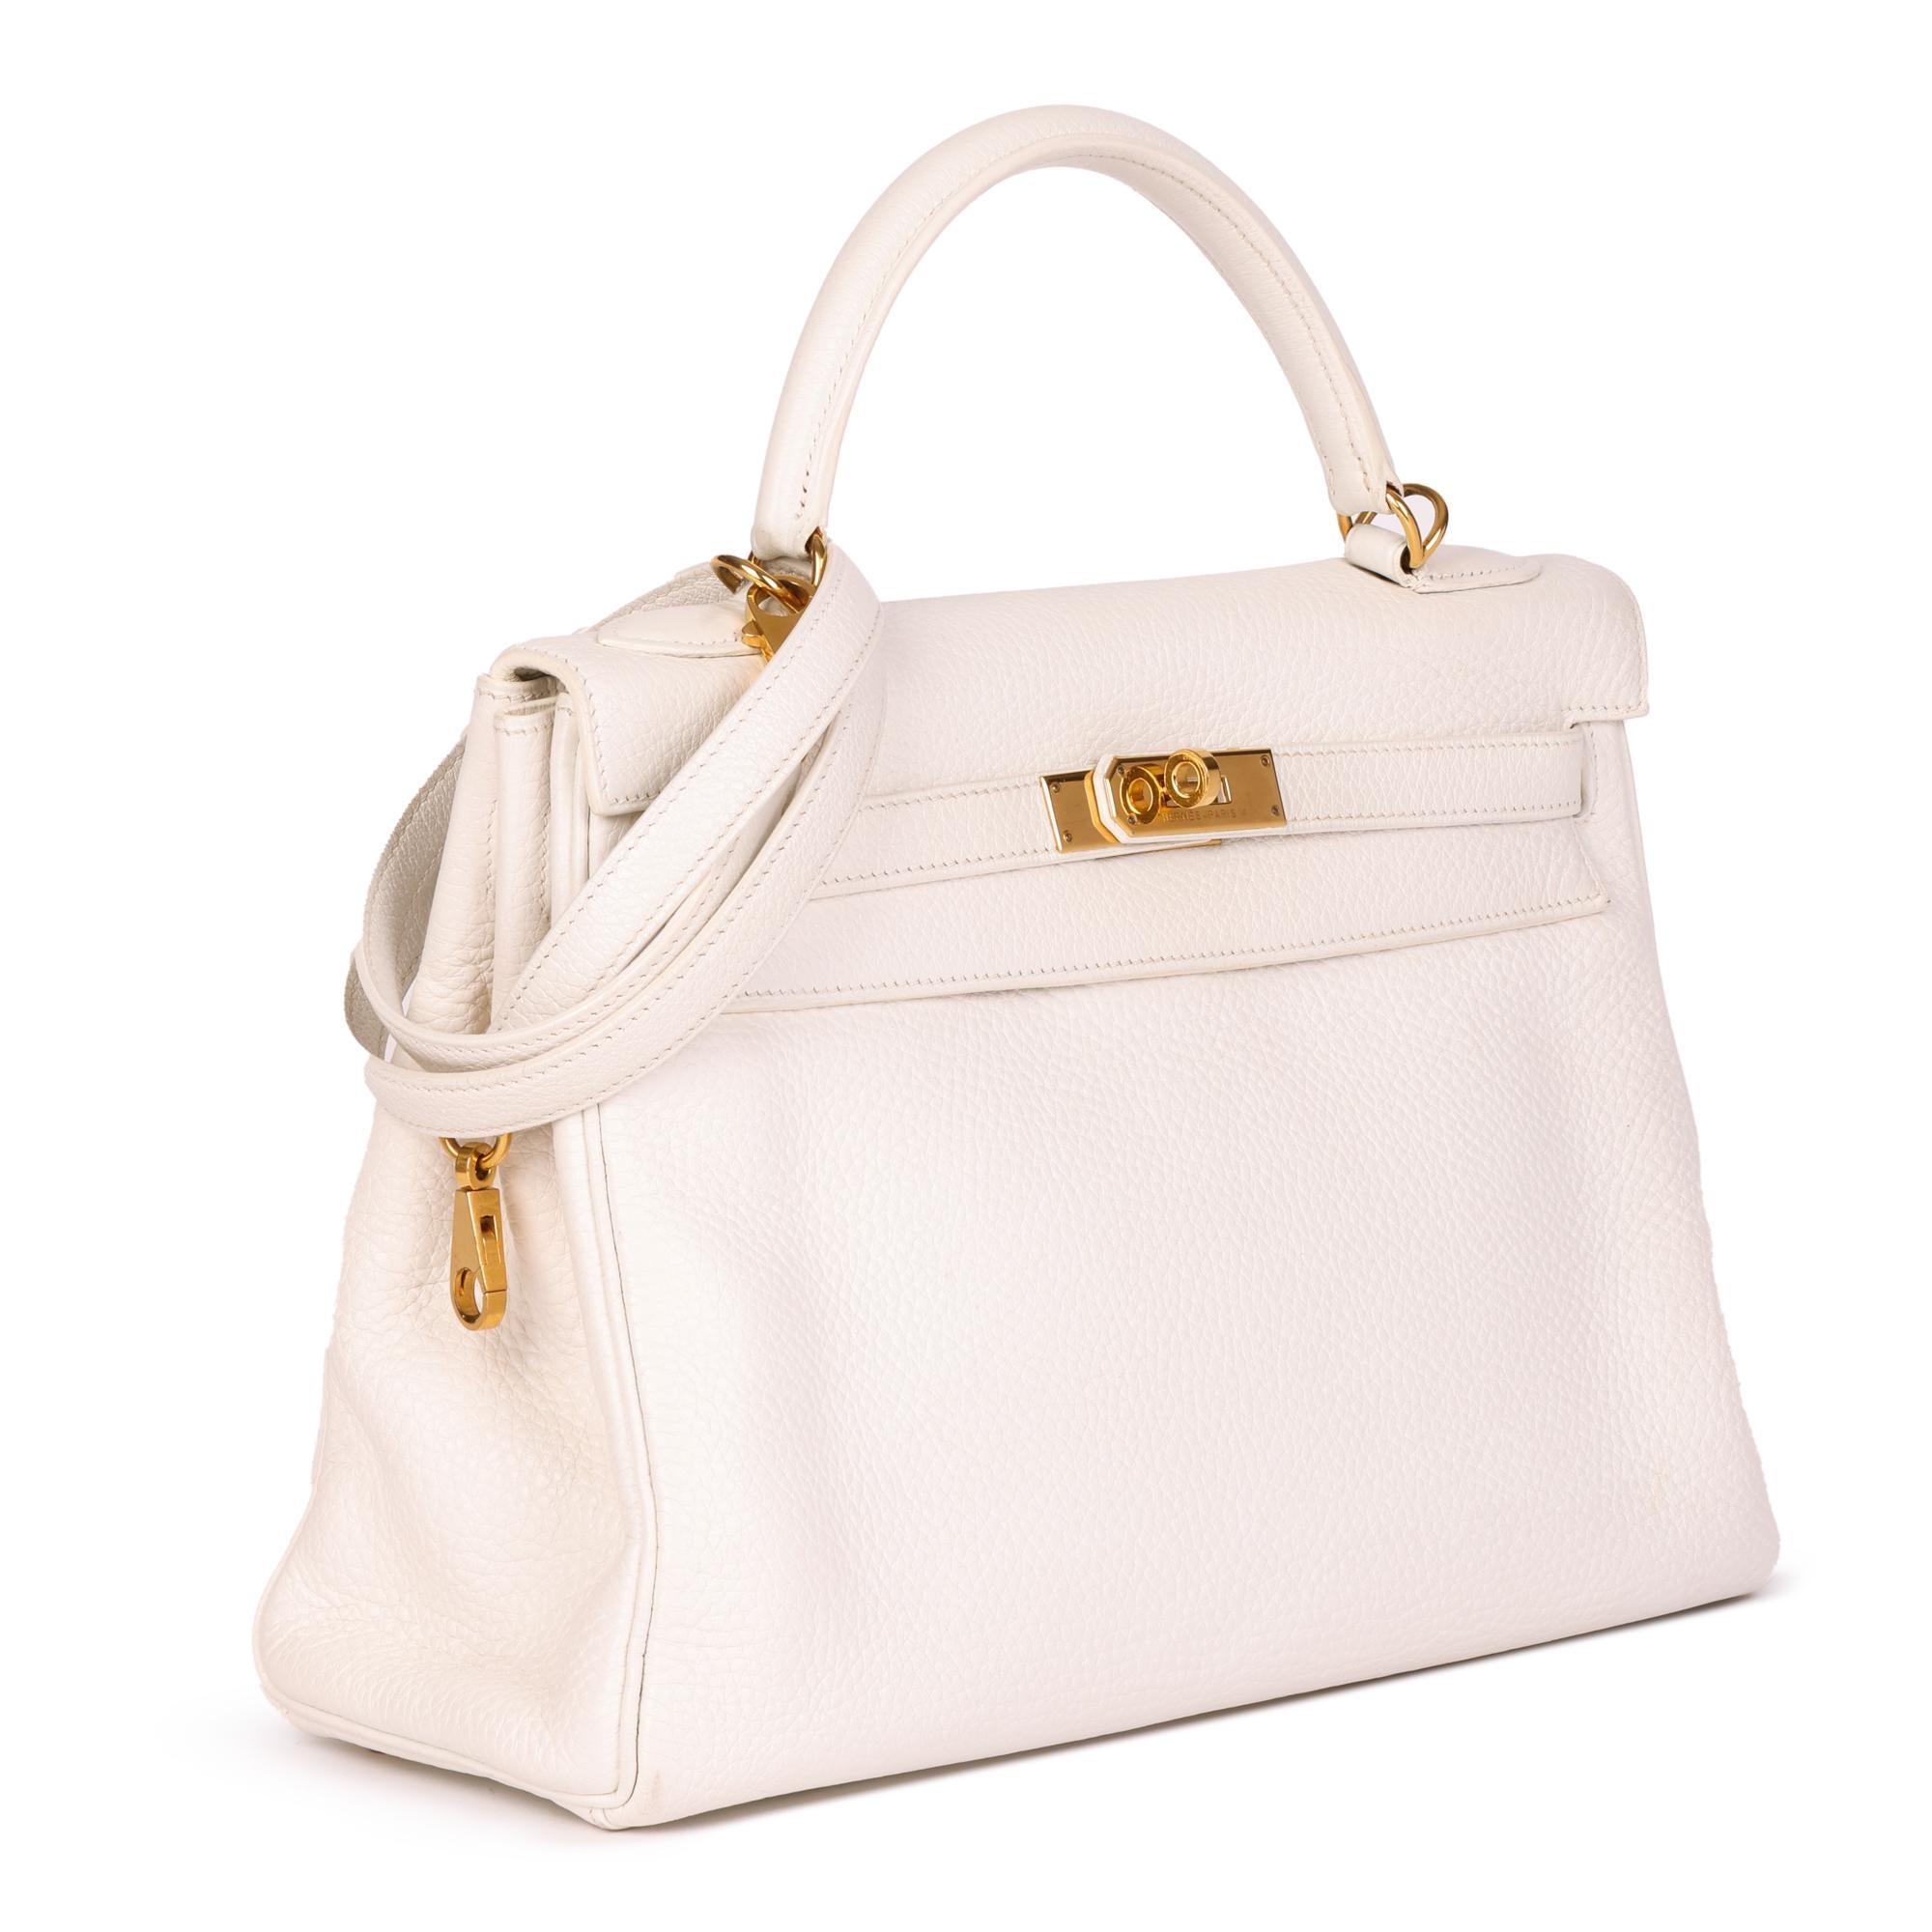 HERMÈS
White Clemence Leather Kelly 32cm Retourne

Serial Number: [H]
Age (Circa): 2004
Accompanied By: Hermès Dust Bag, Shoulder Strap, Raincover
Authenticity Details: Date Stamp (Made in France) 
Gender: Ladies
Type: Top Handle, Shoulder

Colour: